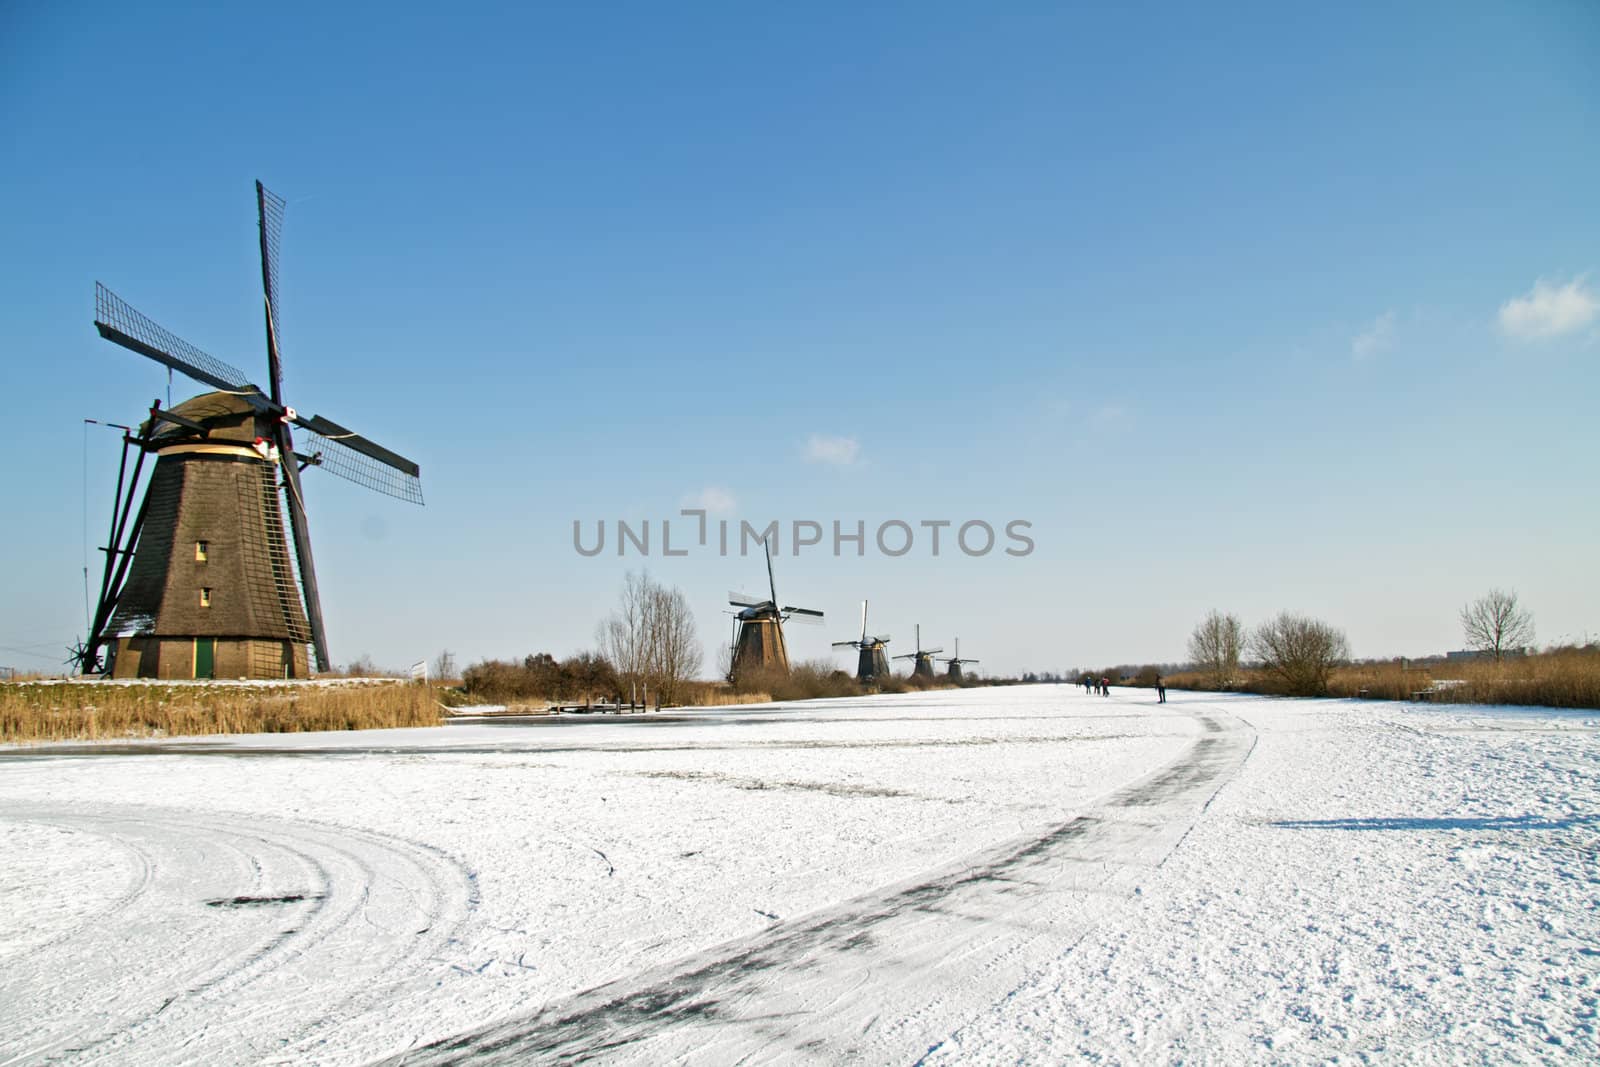 Ice skating in the countryside from the Netherlands by devy